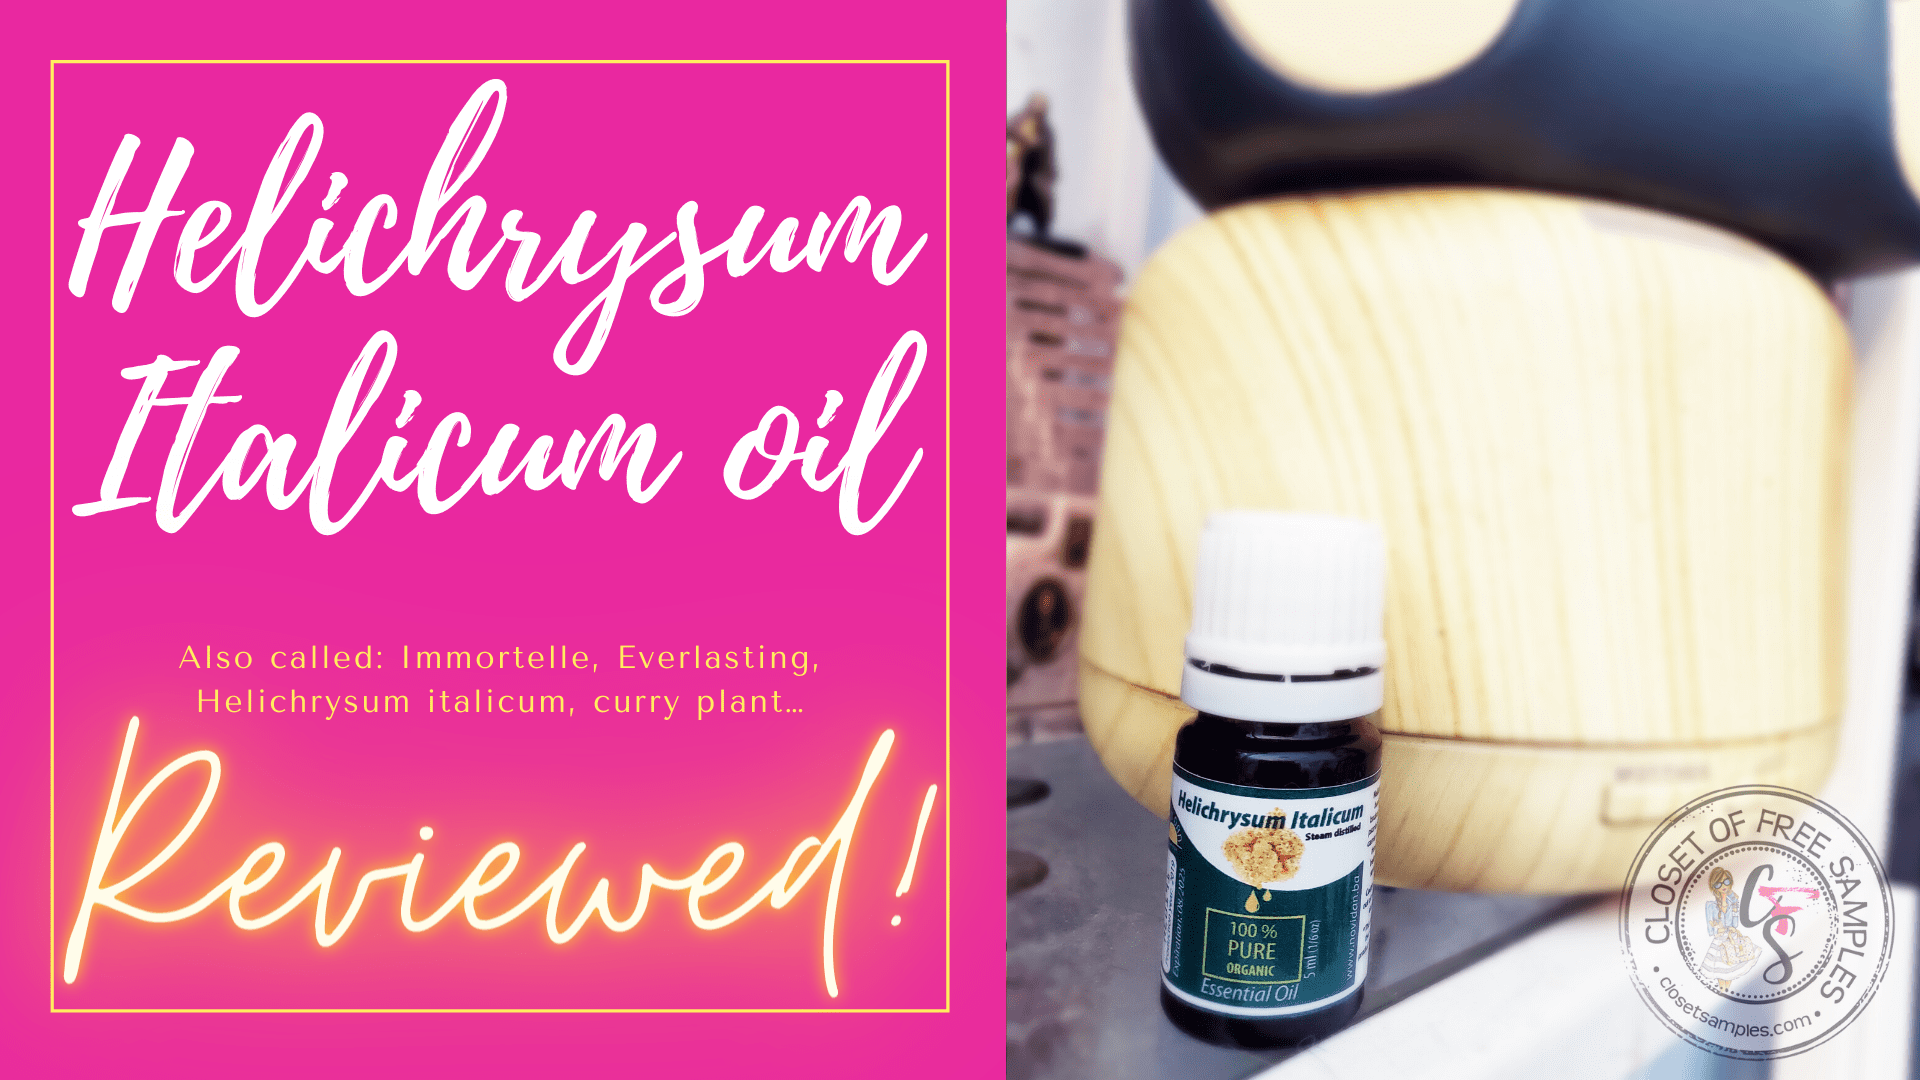 Trying-out-Helichrysum-Italicum-Oil-Review-closetsamples.png